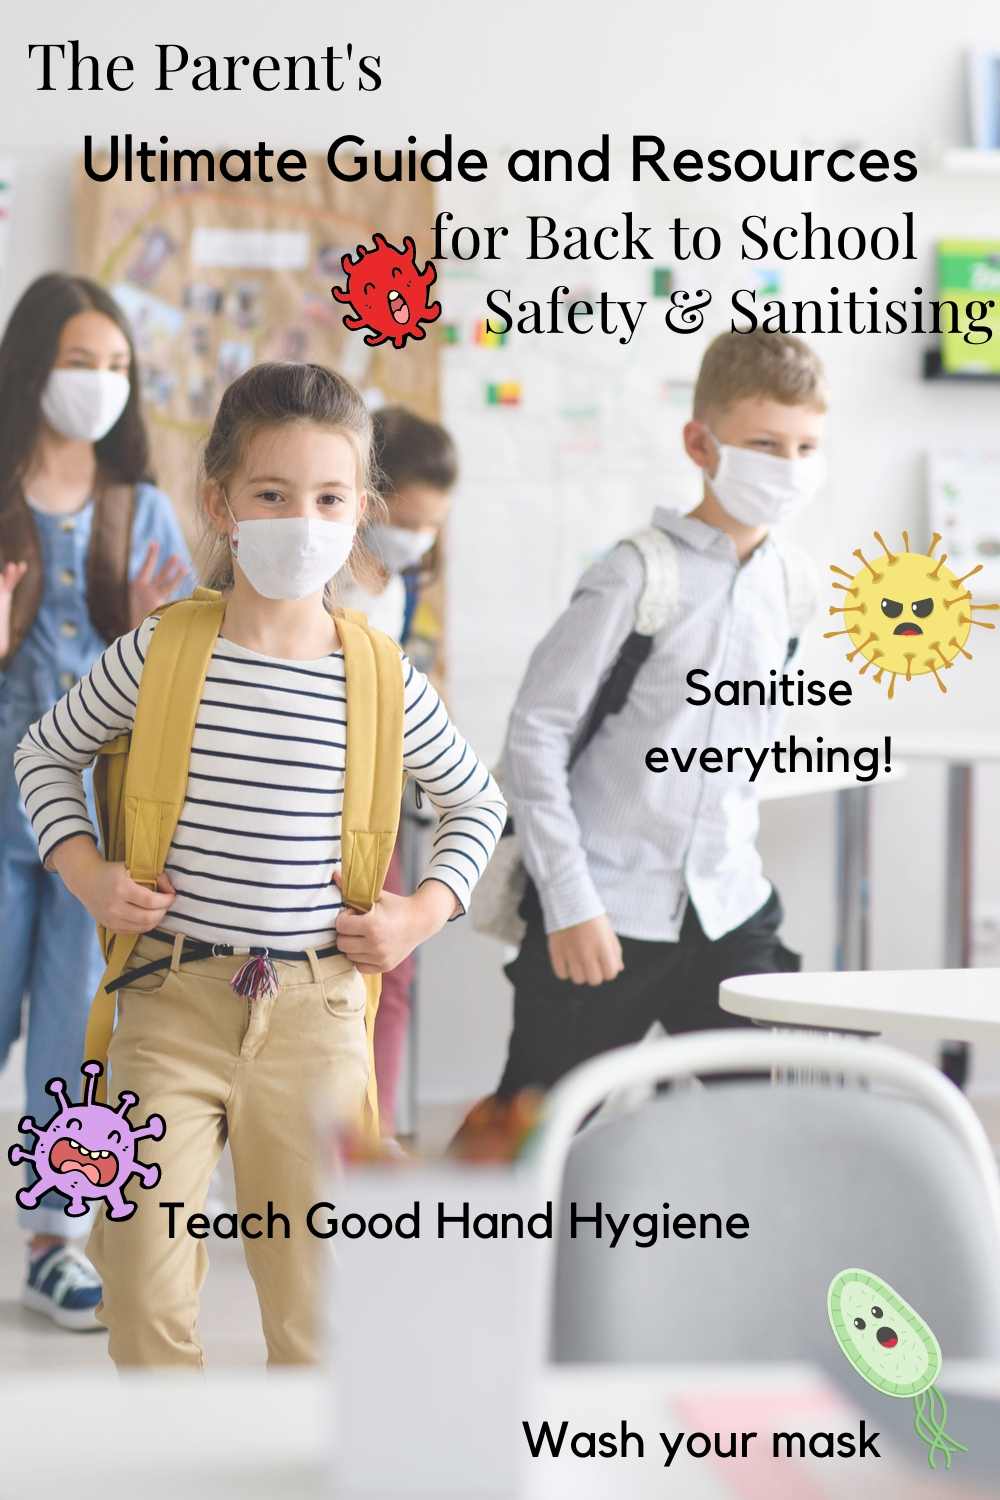 The Parent's Ultimate Guide and Resources for Back to School Safety and Sanitising